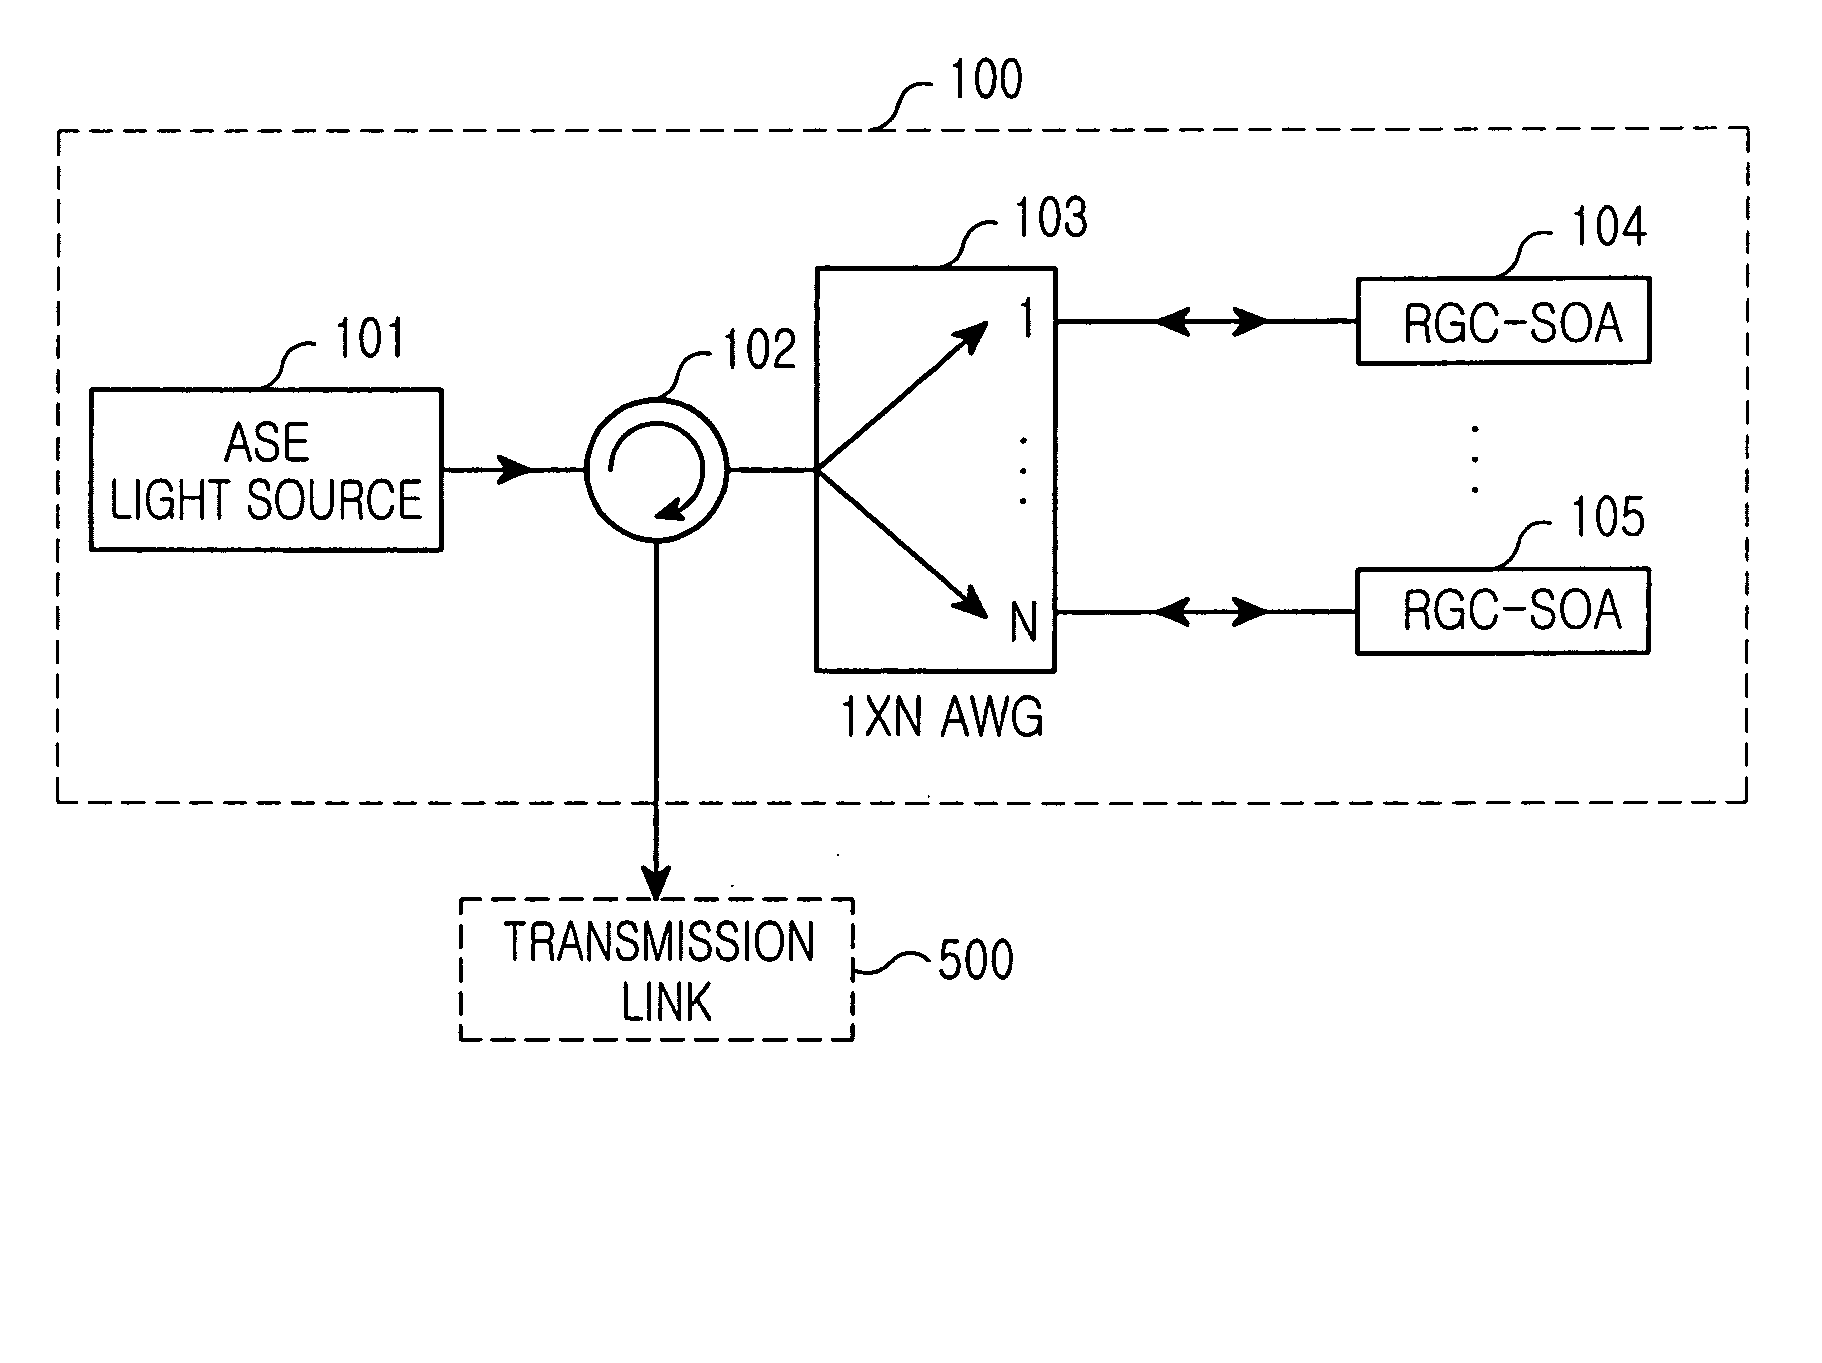 Optical signal transmission apparatus including reflective gain-clamped semiconductor optical amplifier